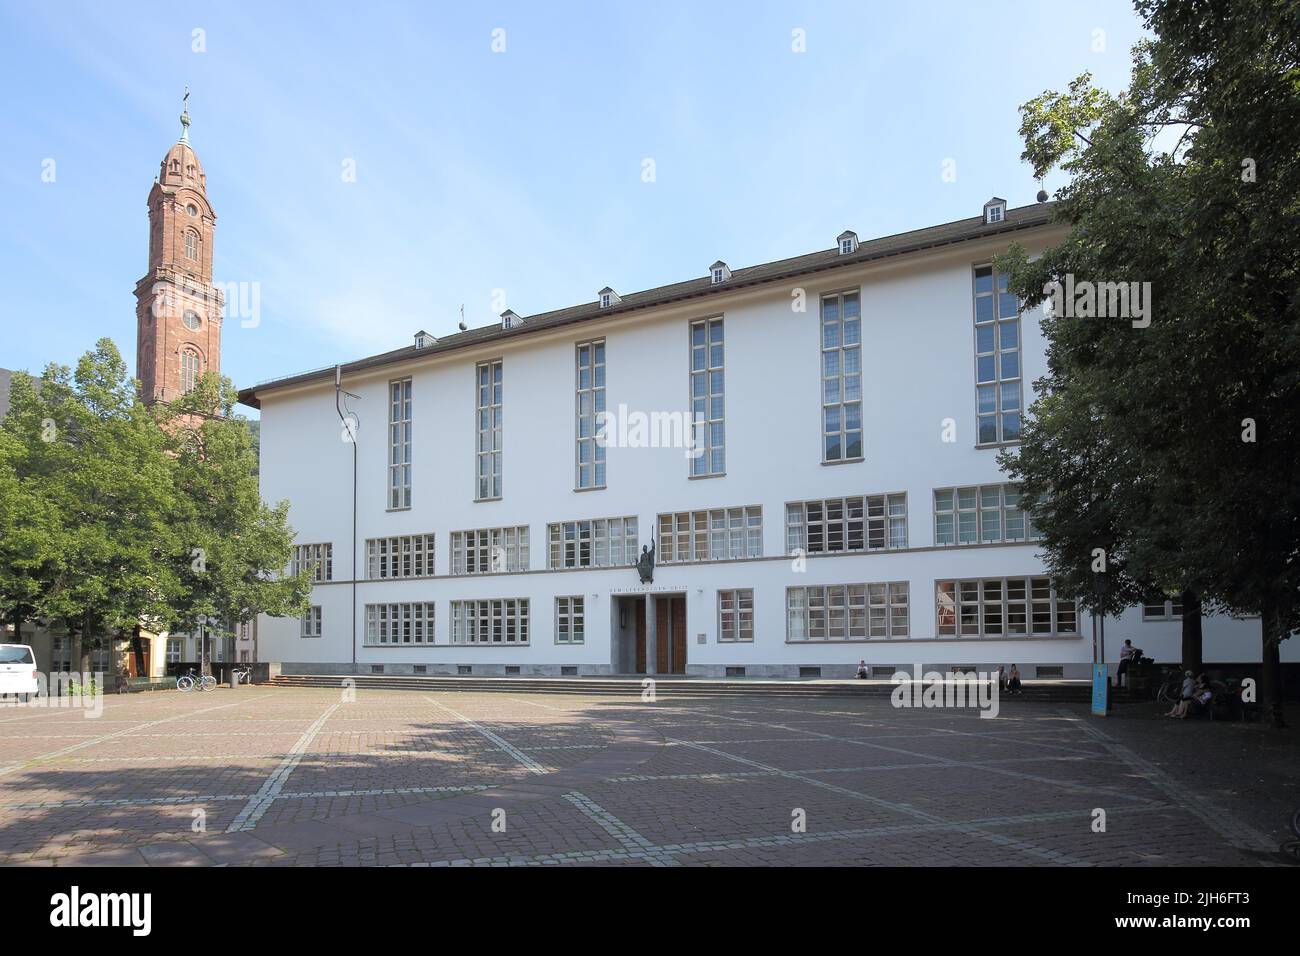 New University on University Square with the tower of the Jesuit Church in the Old Town, Heidelberg, Bergstrasse, Baden-Wuerttemberg, Germany Stock Photo